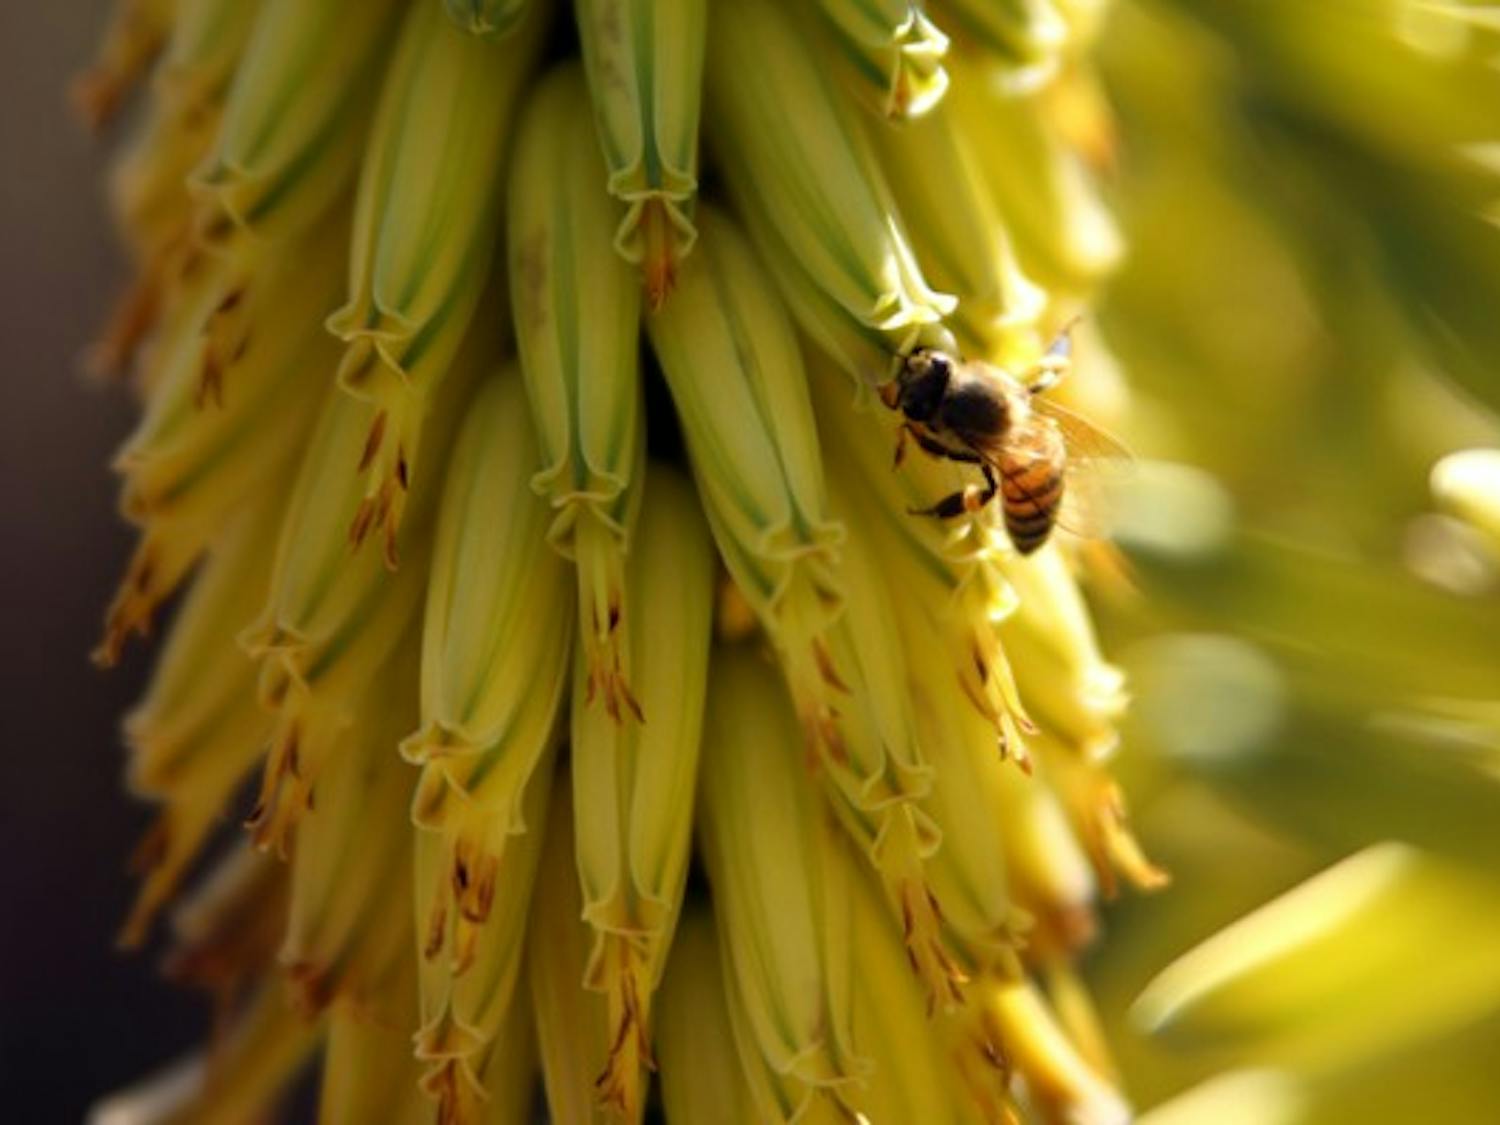 A bee pollinates a bright yellow flower near Palm Walk on the Tempe campus Sunday afternoon. (Photo by Jenn Allen)